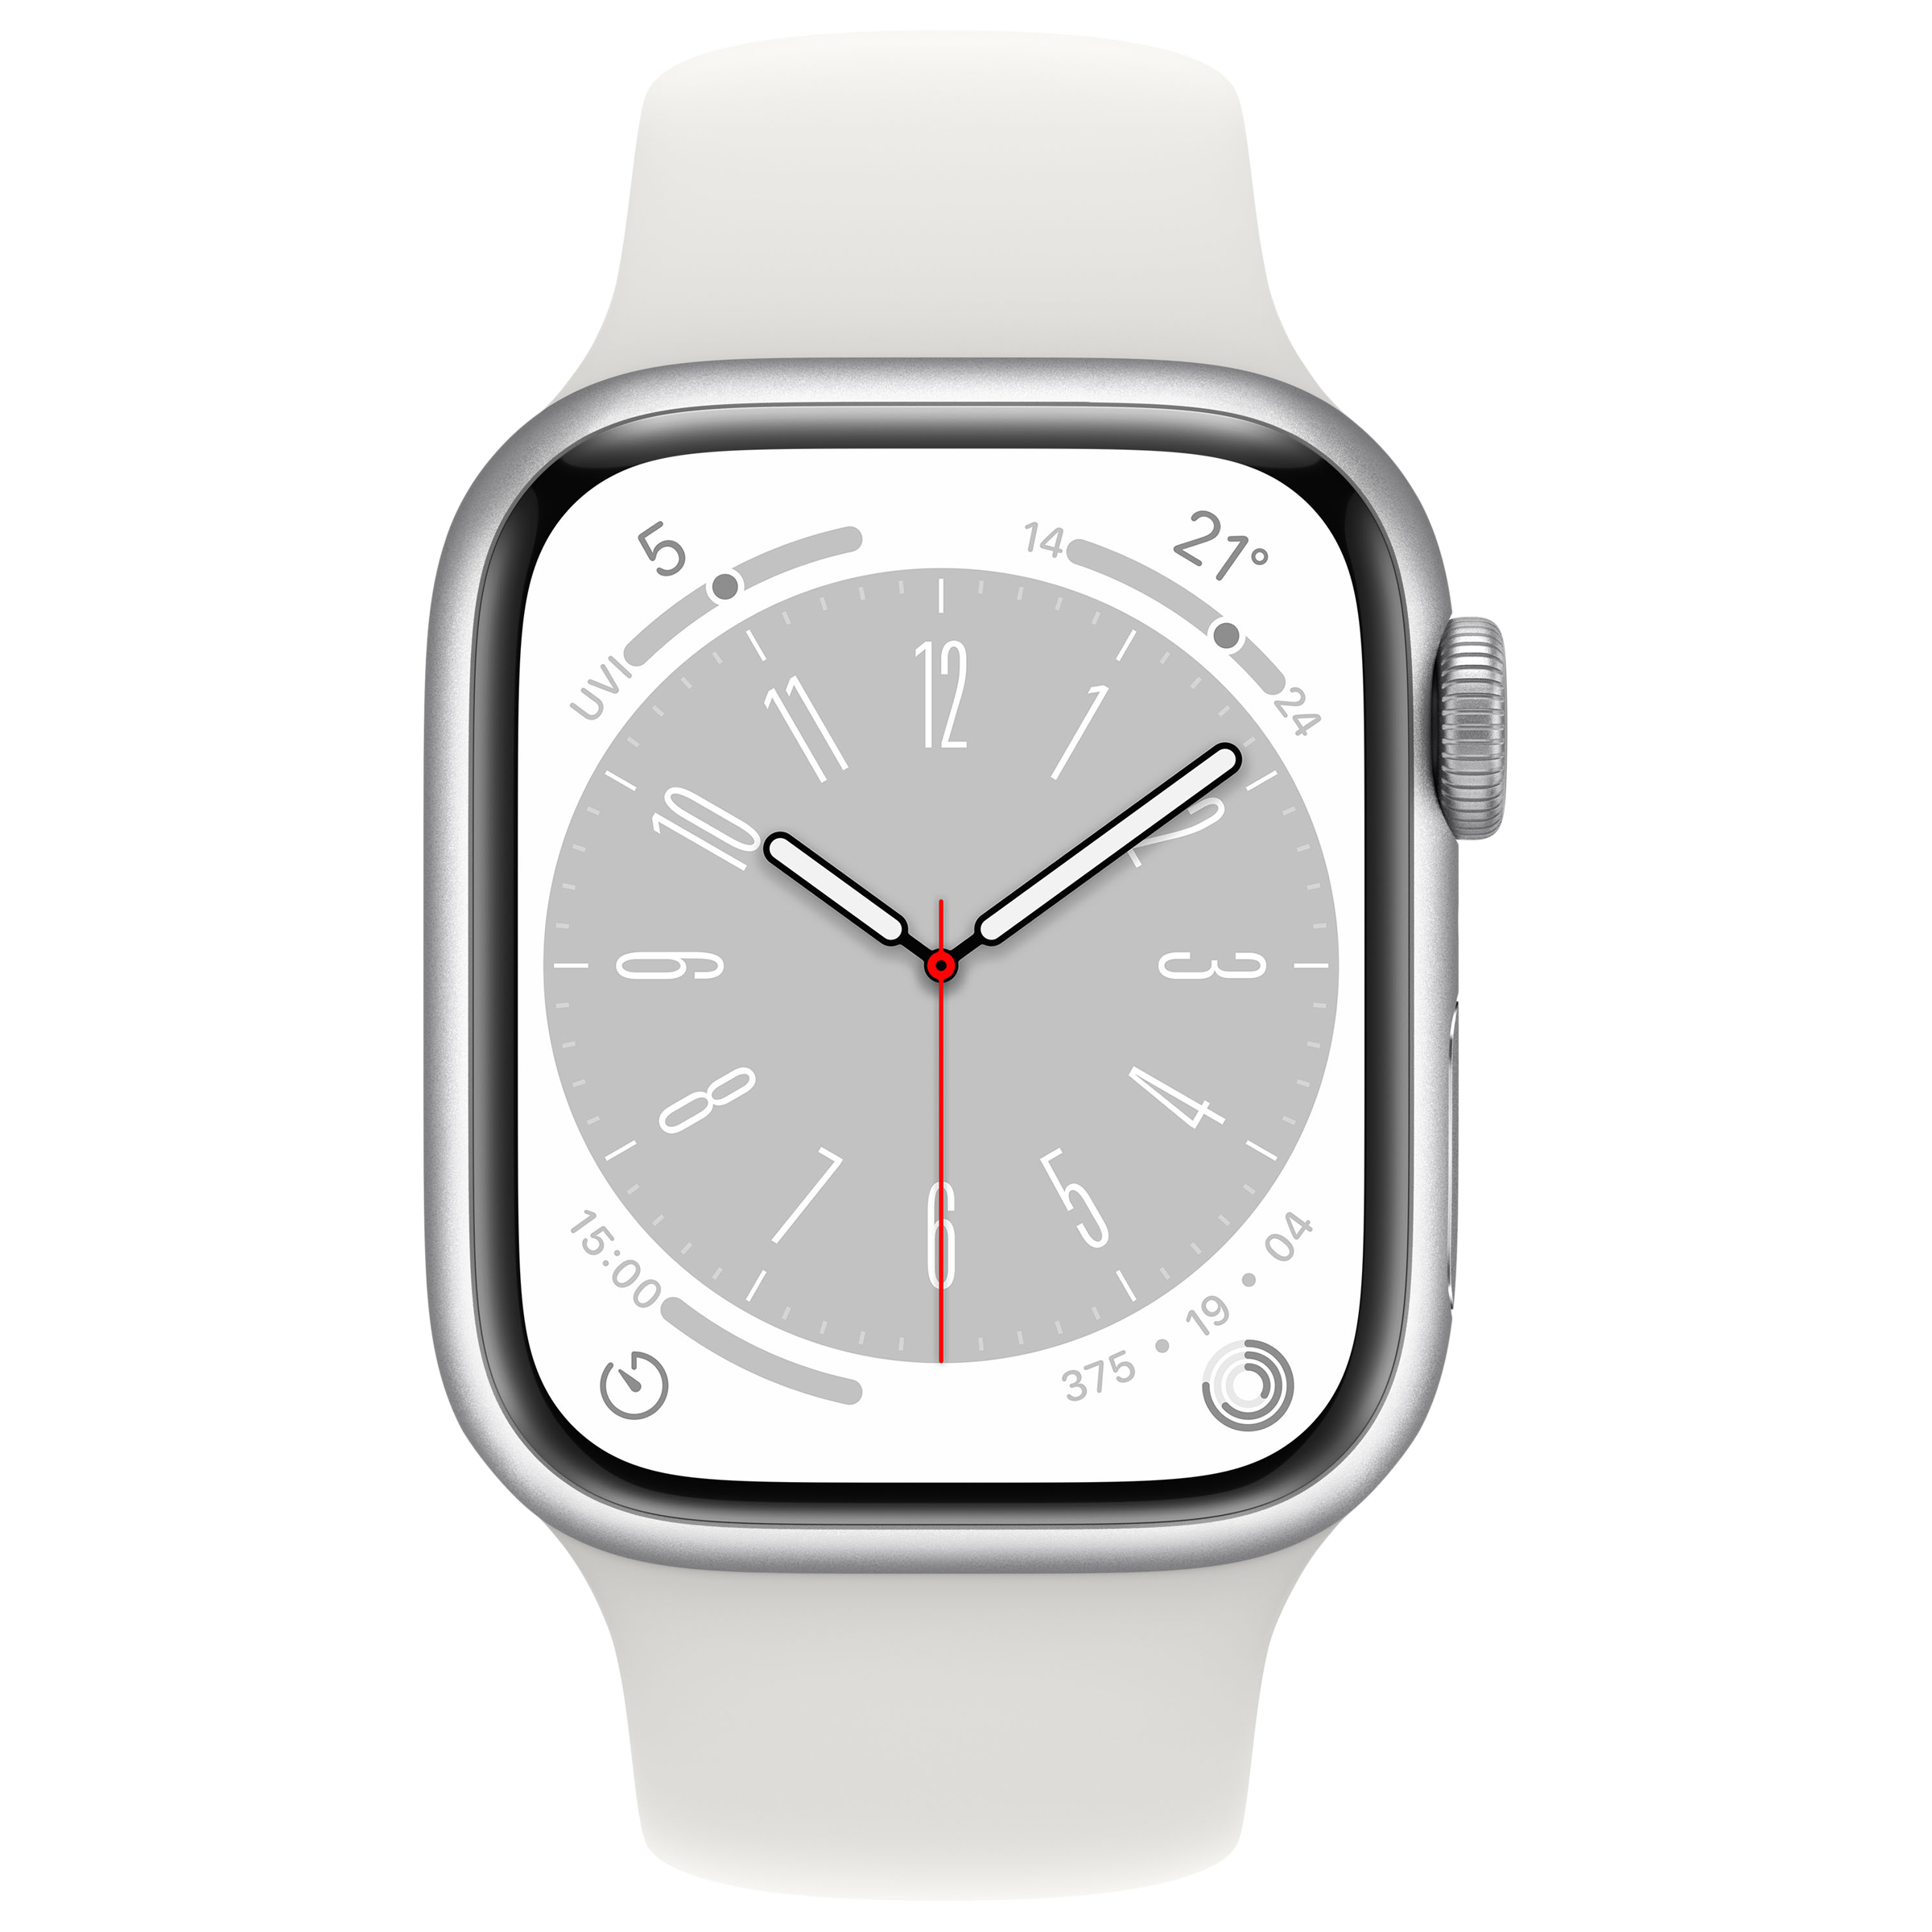 Apple iWatch PNG Free Image